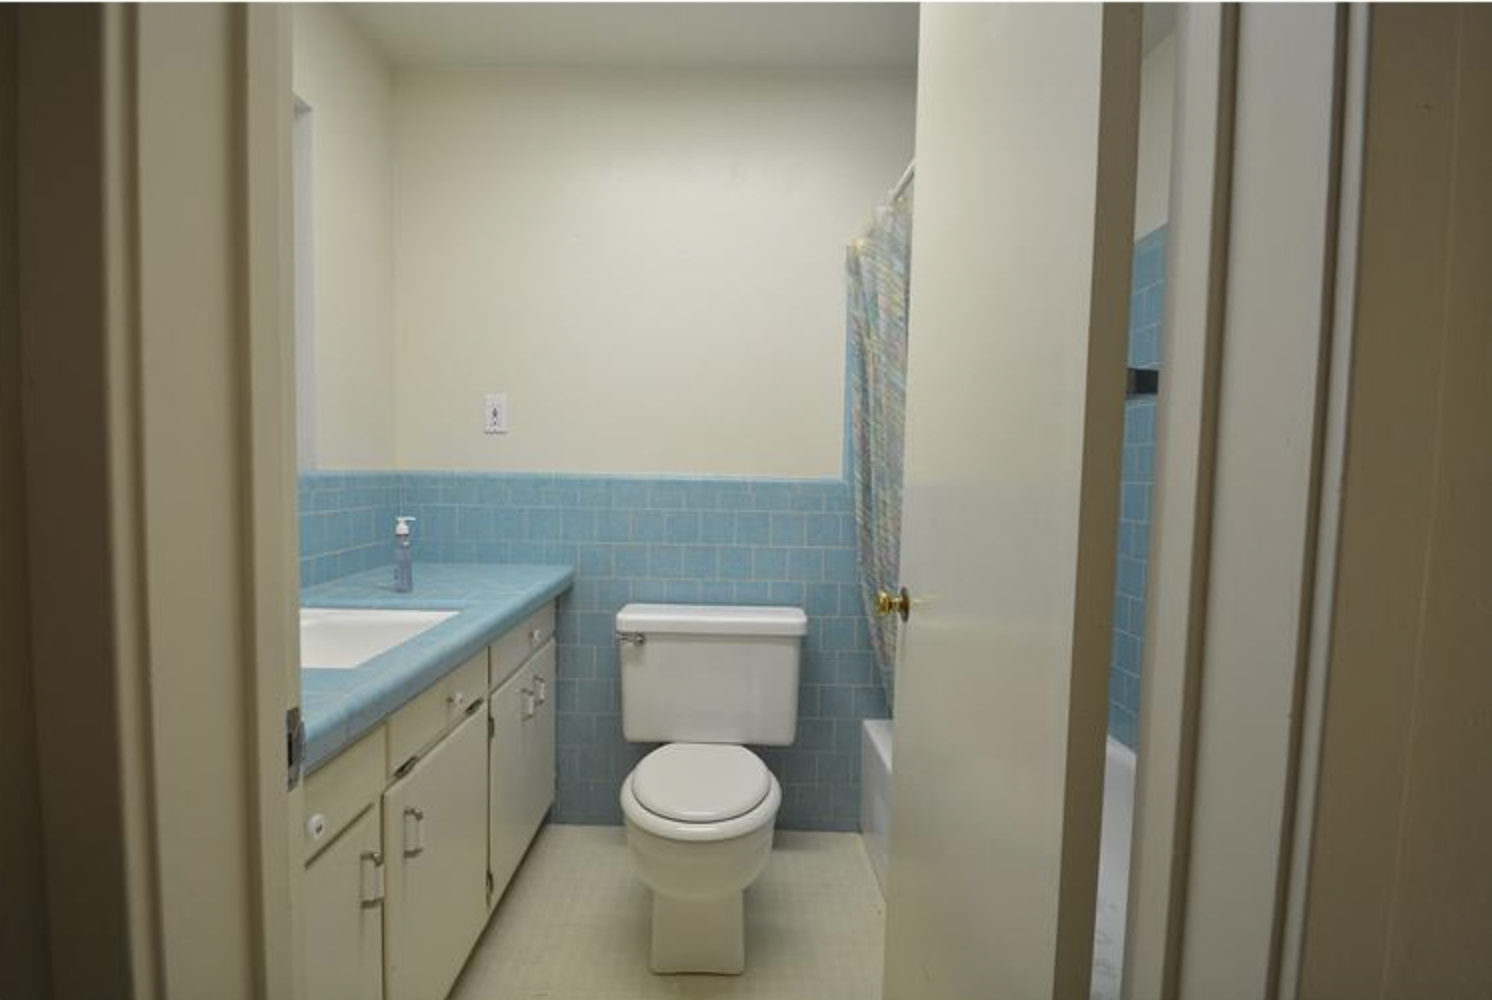  Before image of a bathroom with blue tile.  